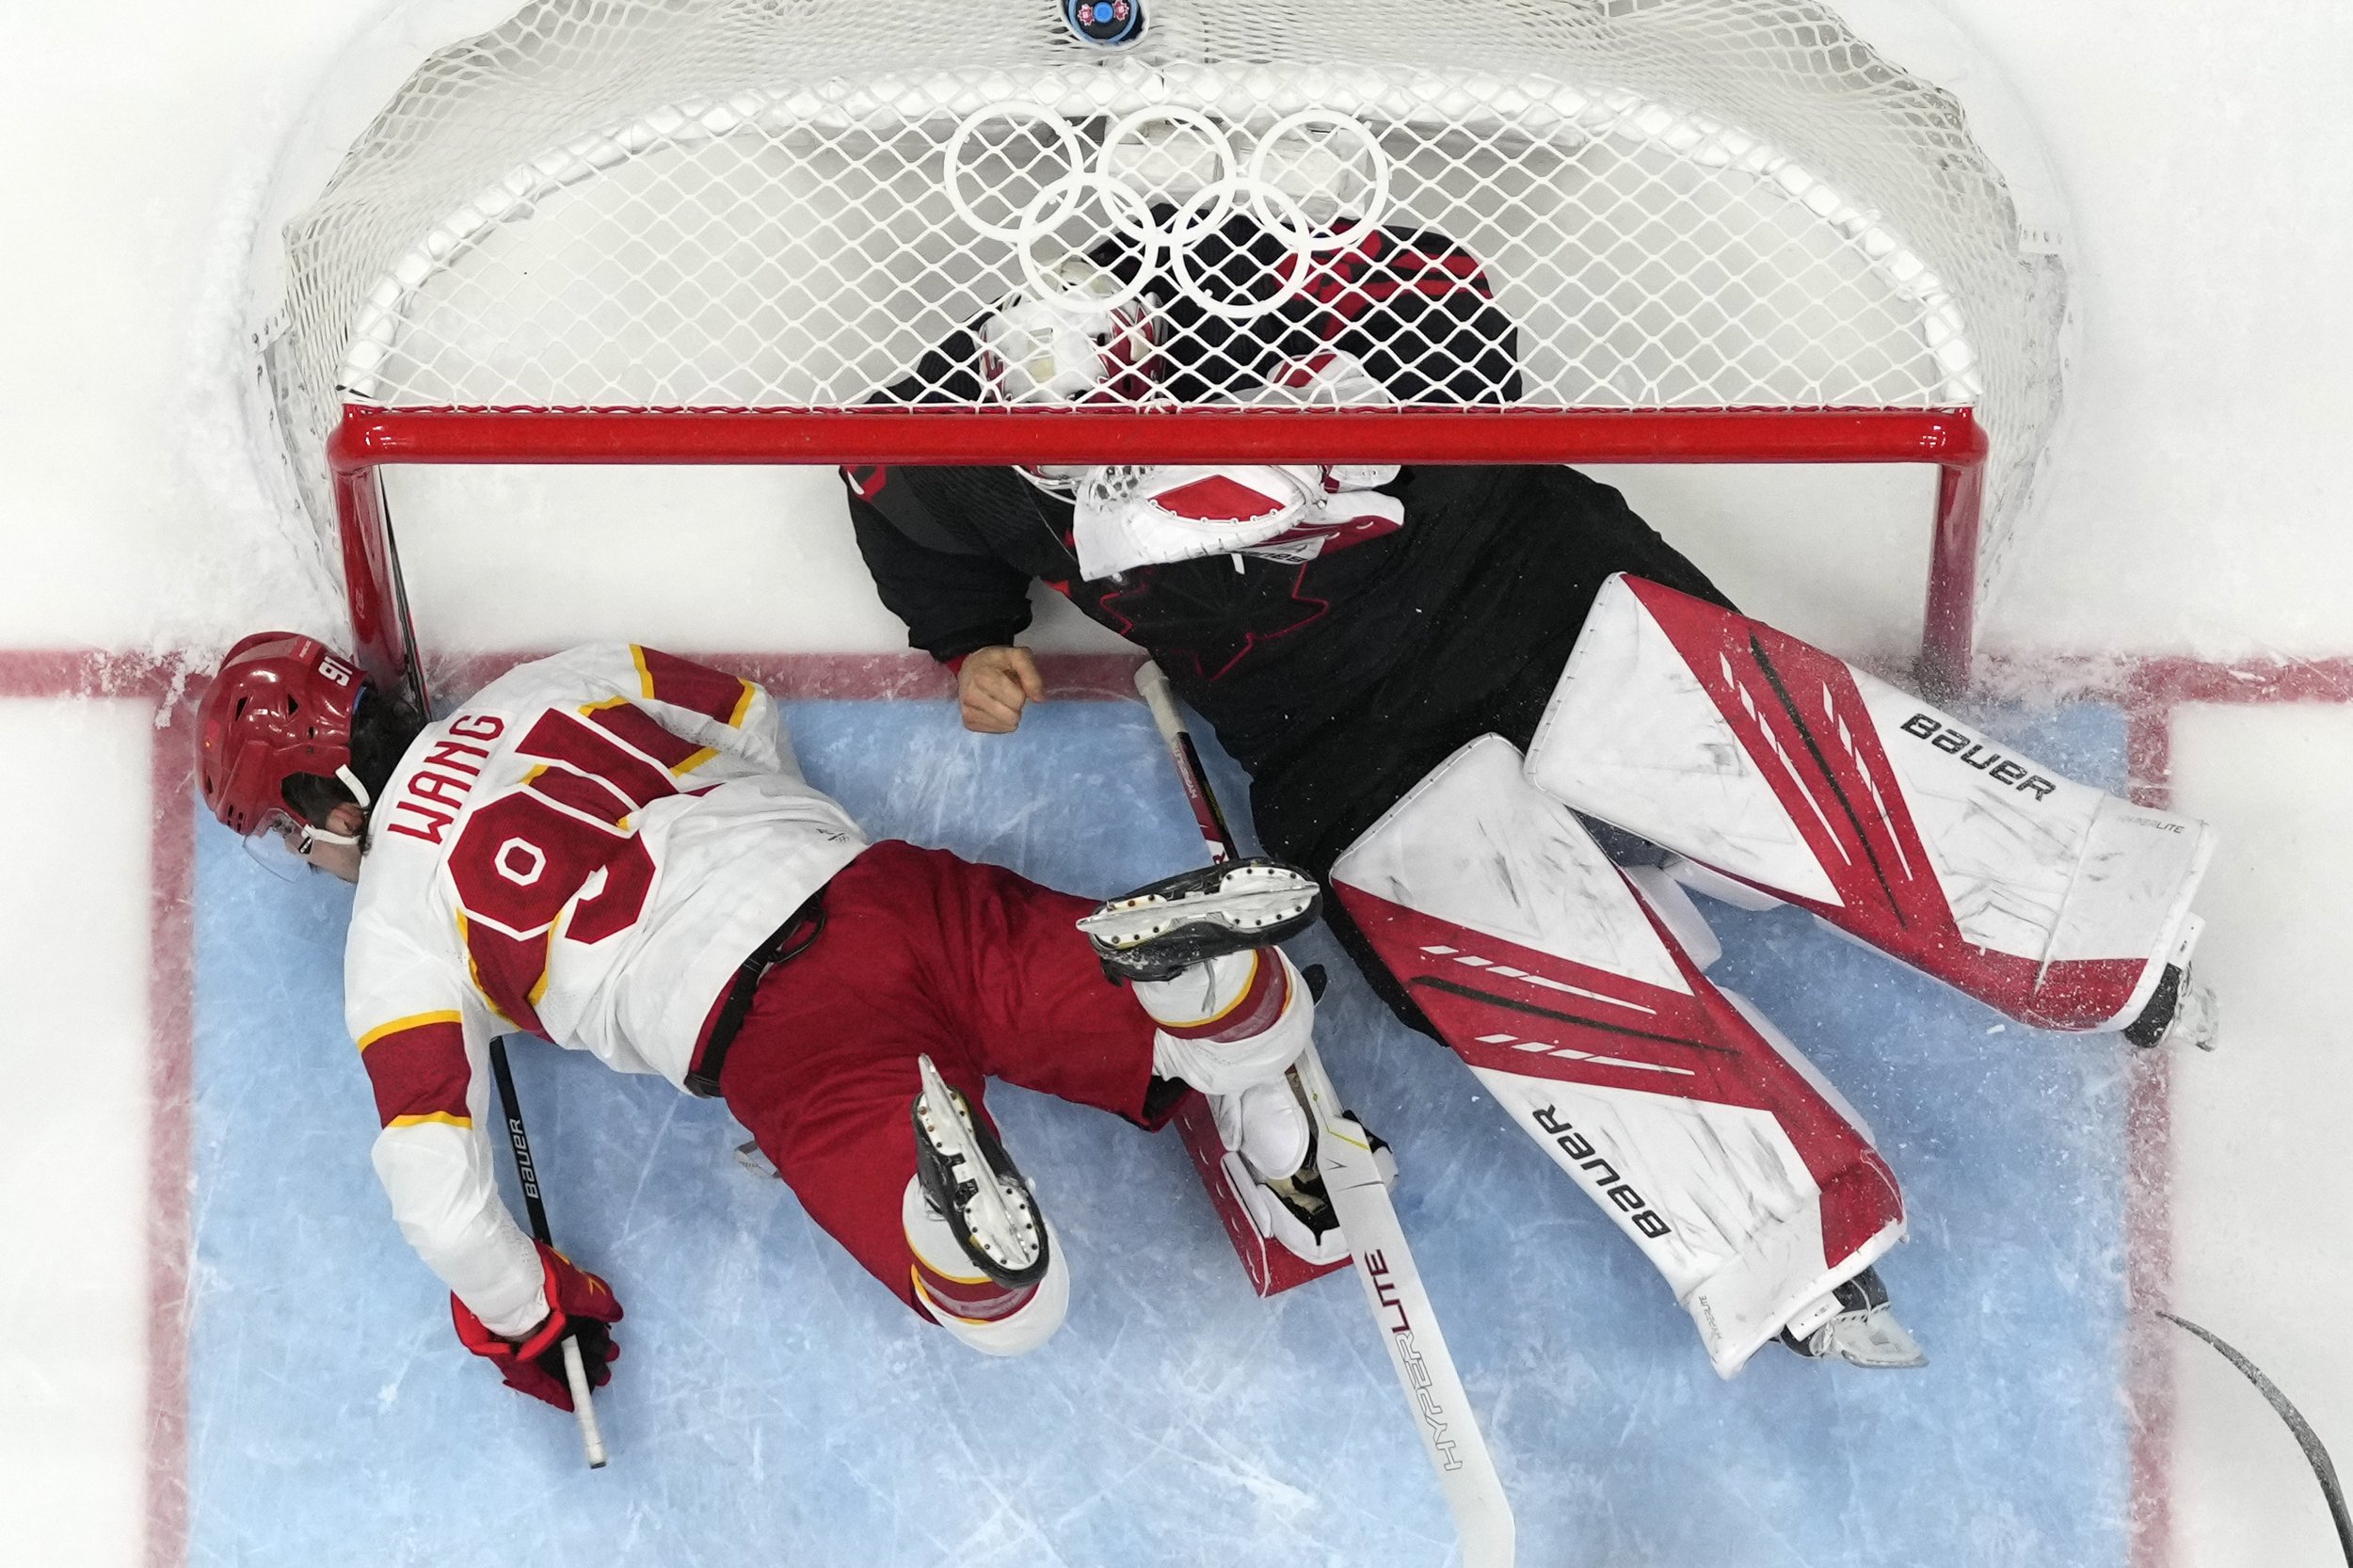  China's Wang Taile (Tyler Wong) (91) hits the post as he collides with Canada goalkeeper Matt Tomkins during a men's qualification round hockey game at the 2022 Winter Olympics, Tuesday, Feb. 15, 2022, in Beijing. (AP Photo/Matt Slocum) 